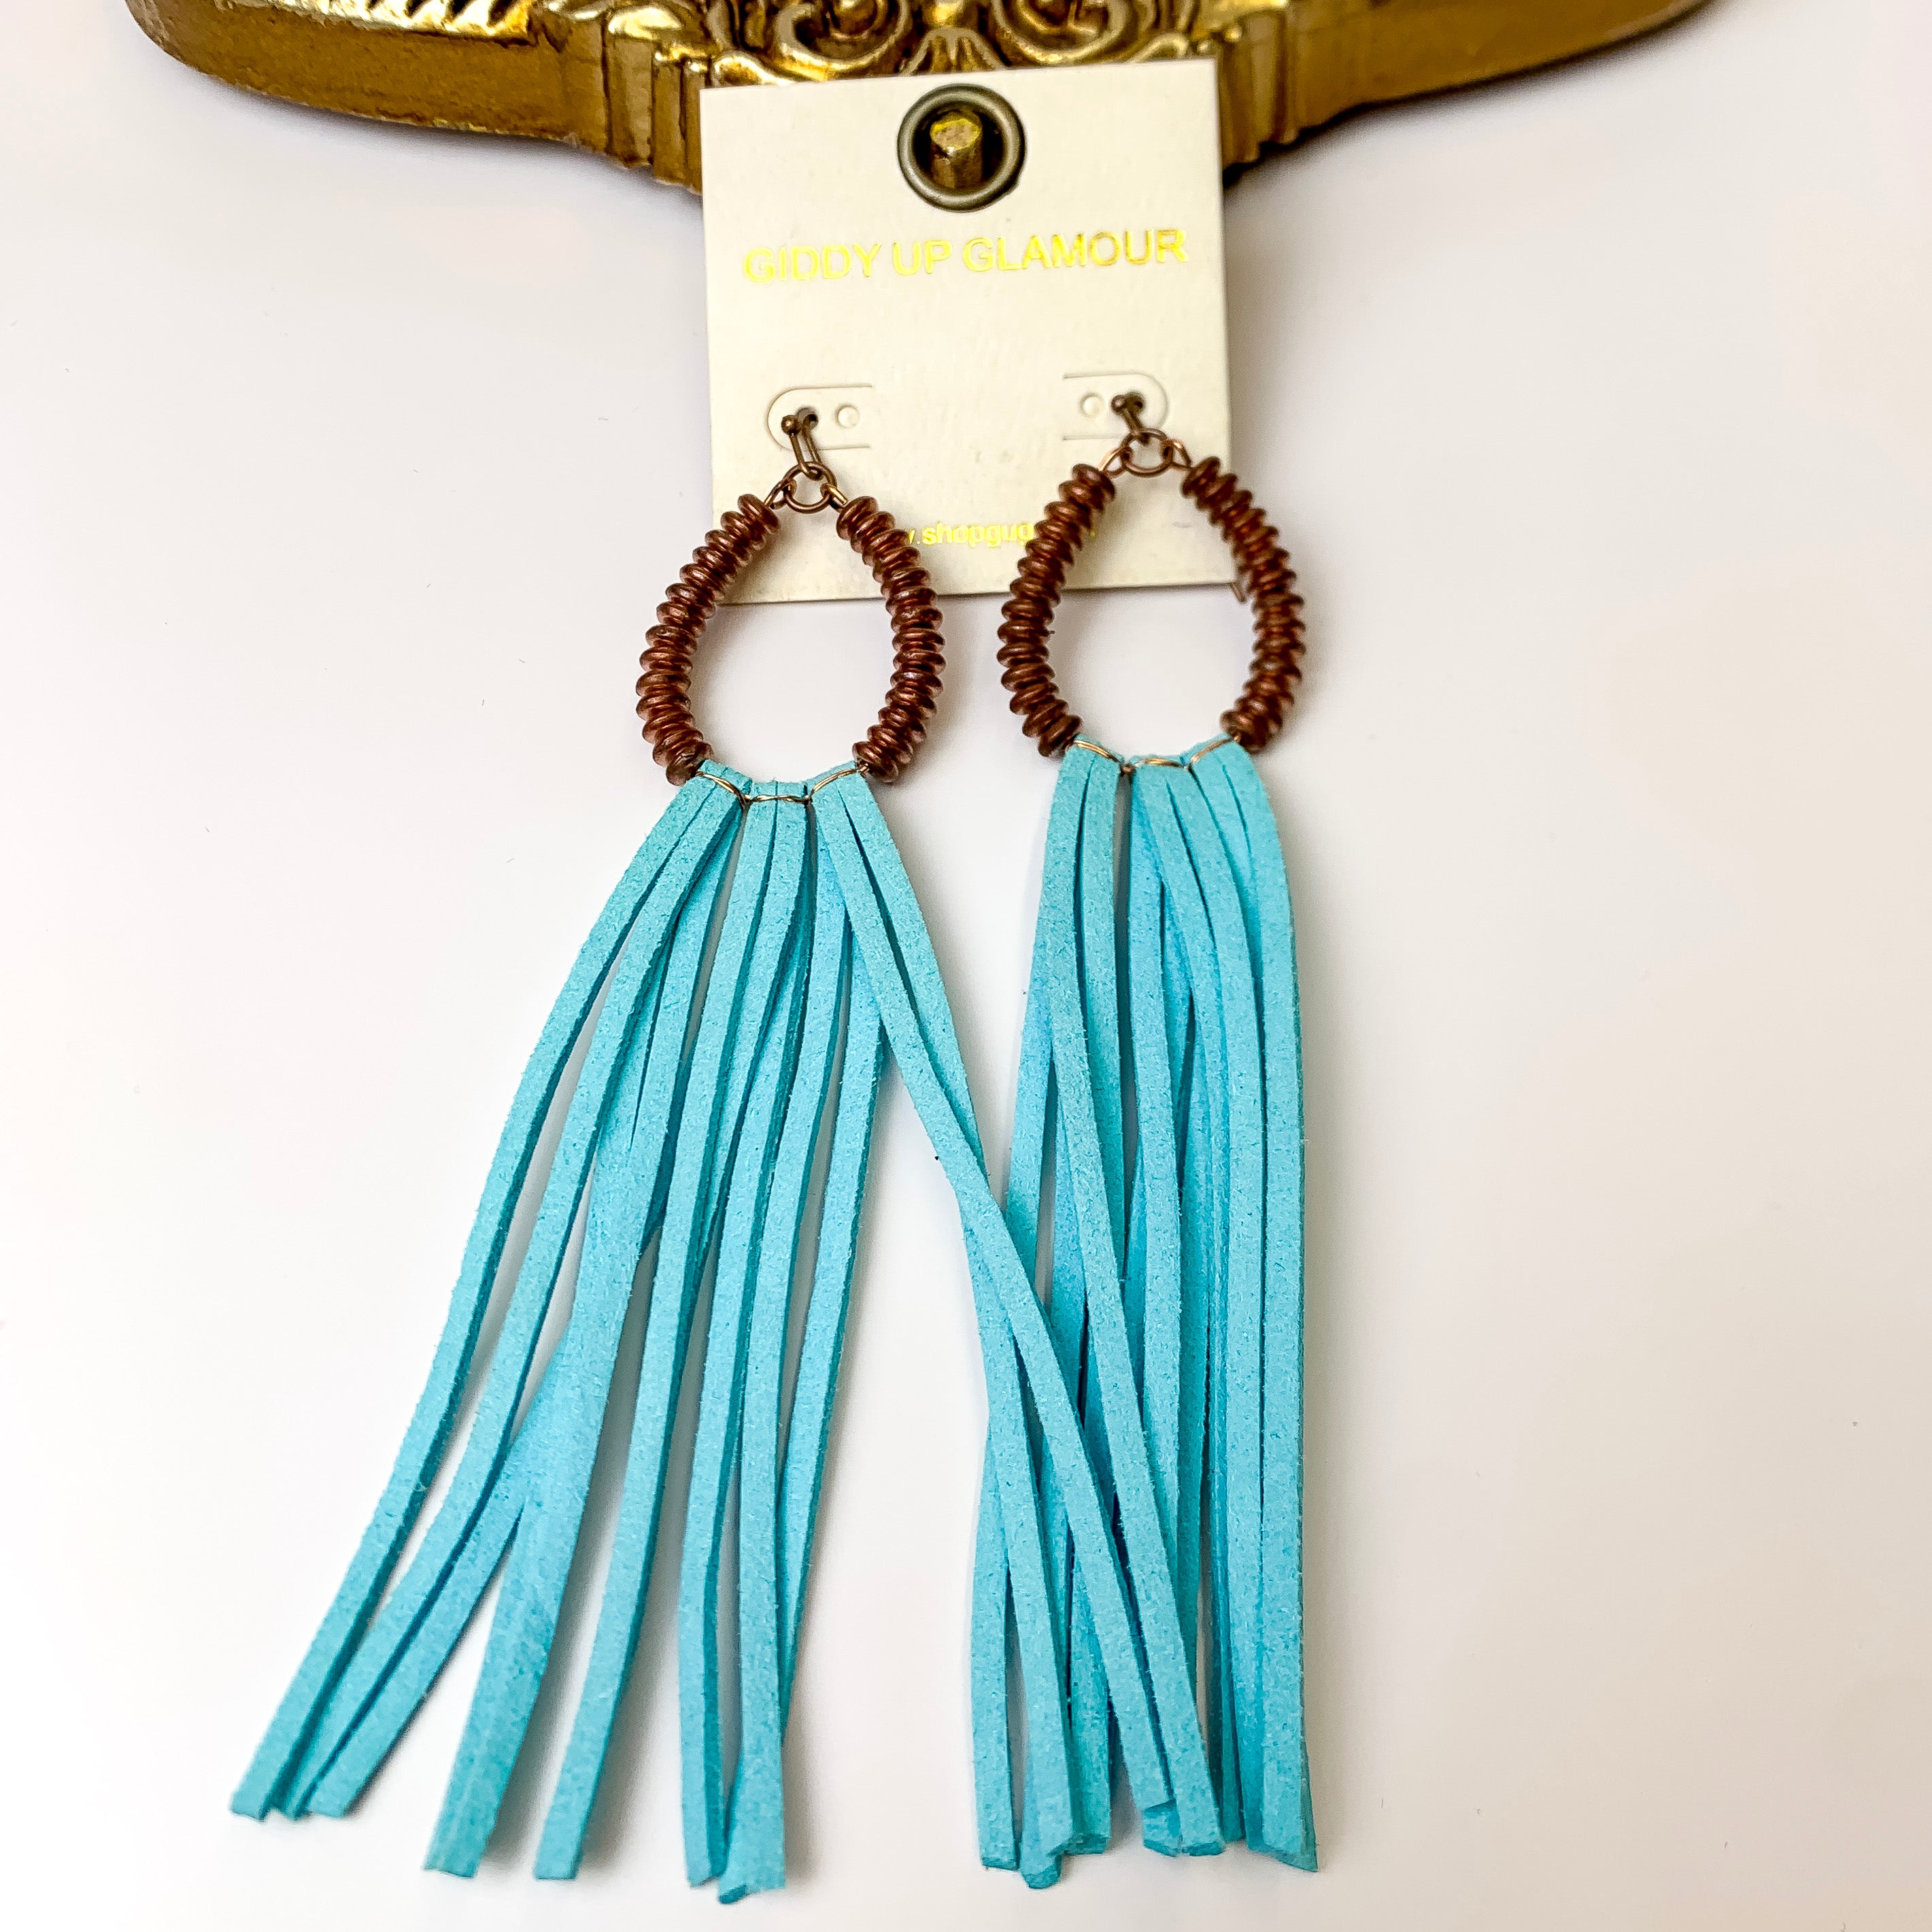 Copper Tone Metal Disk Beaded Teardrop Earrings with Teal Blue Faux Leather Tassels - Giddy Up Glamour Boutique